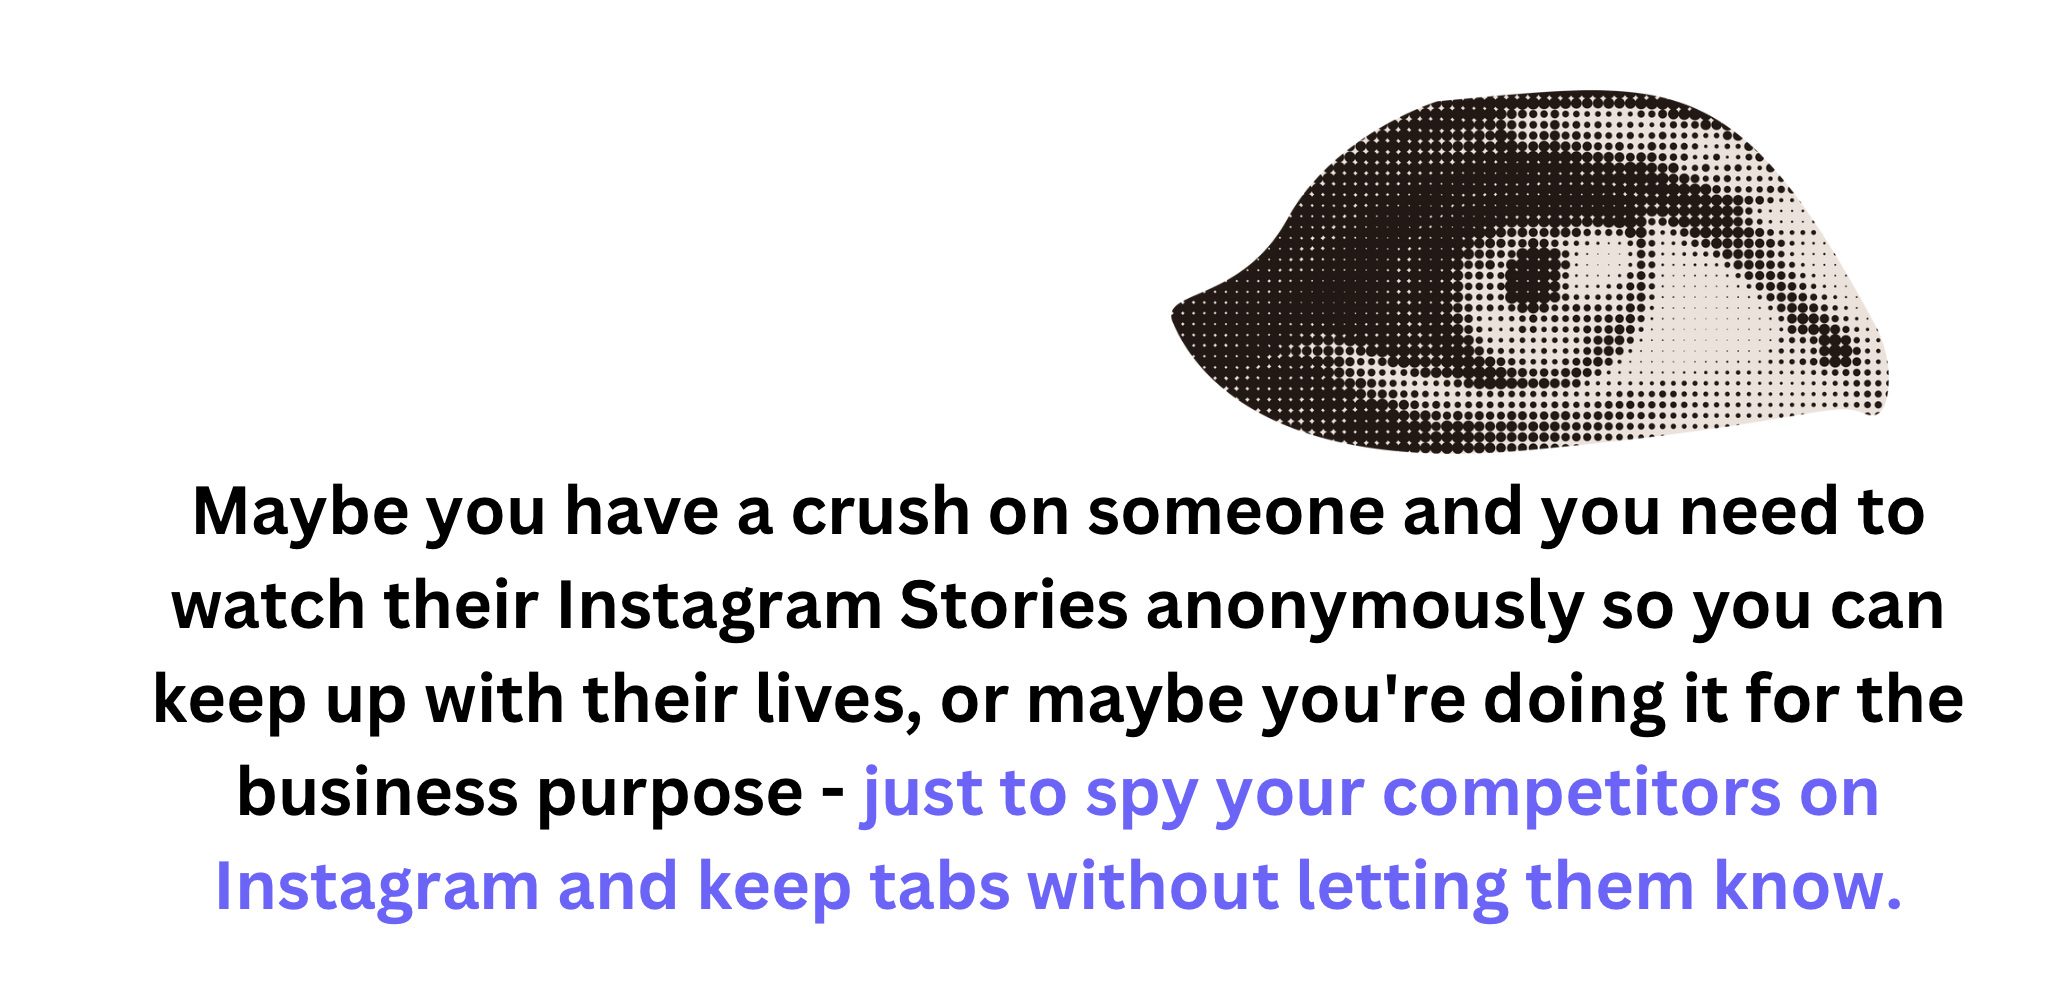 How to Watch Instagram Stories Anonymously | Social Tradia